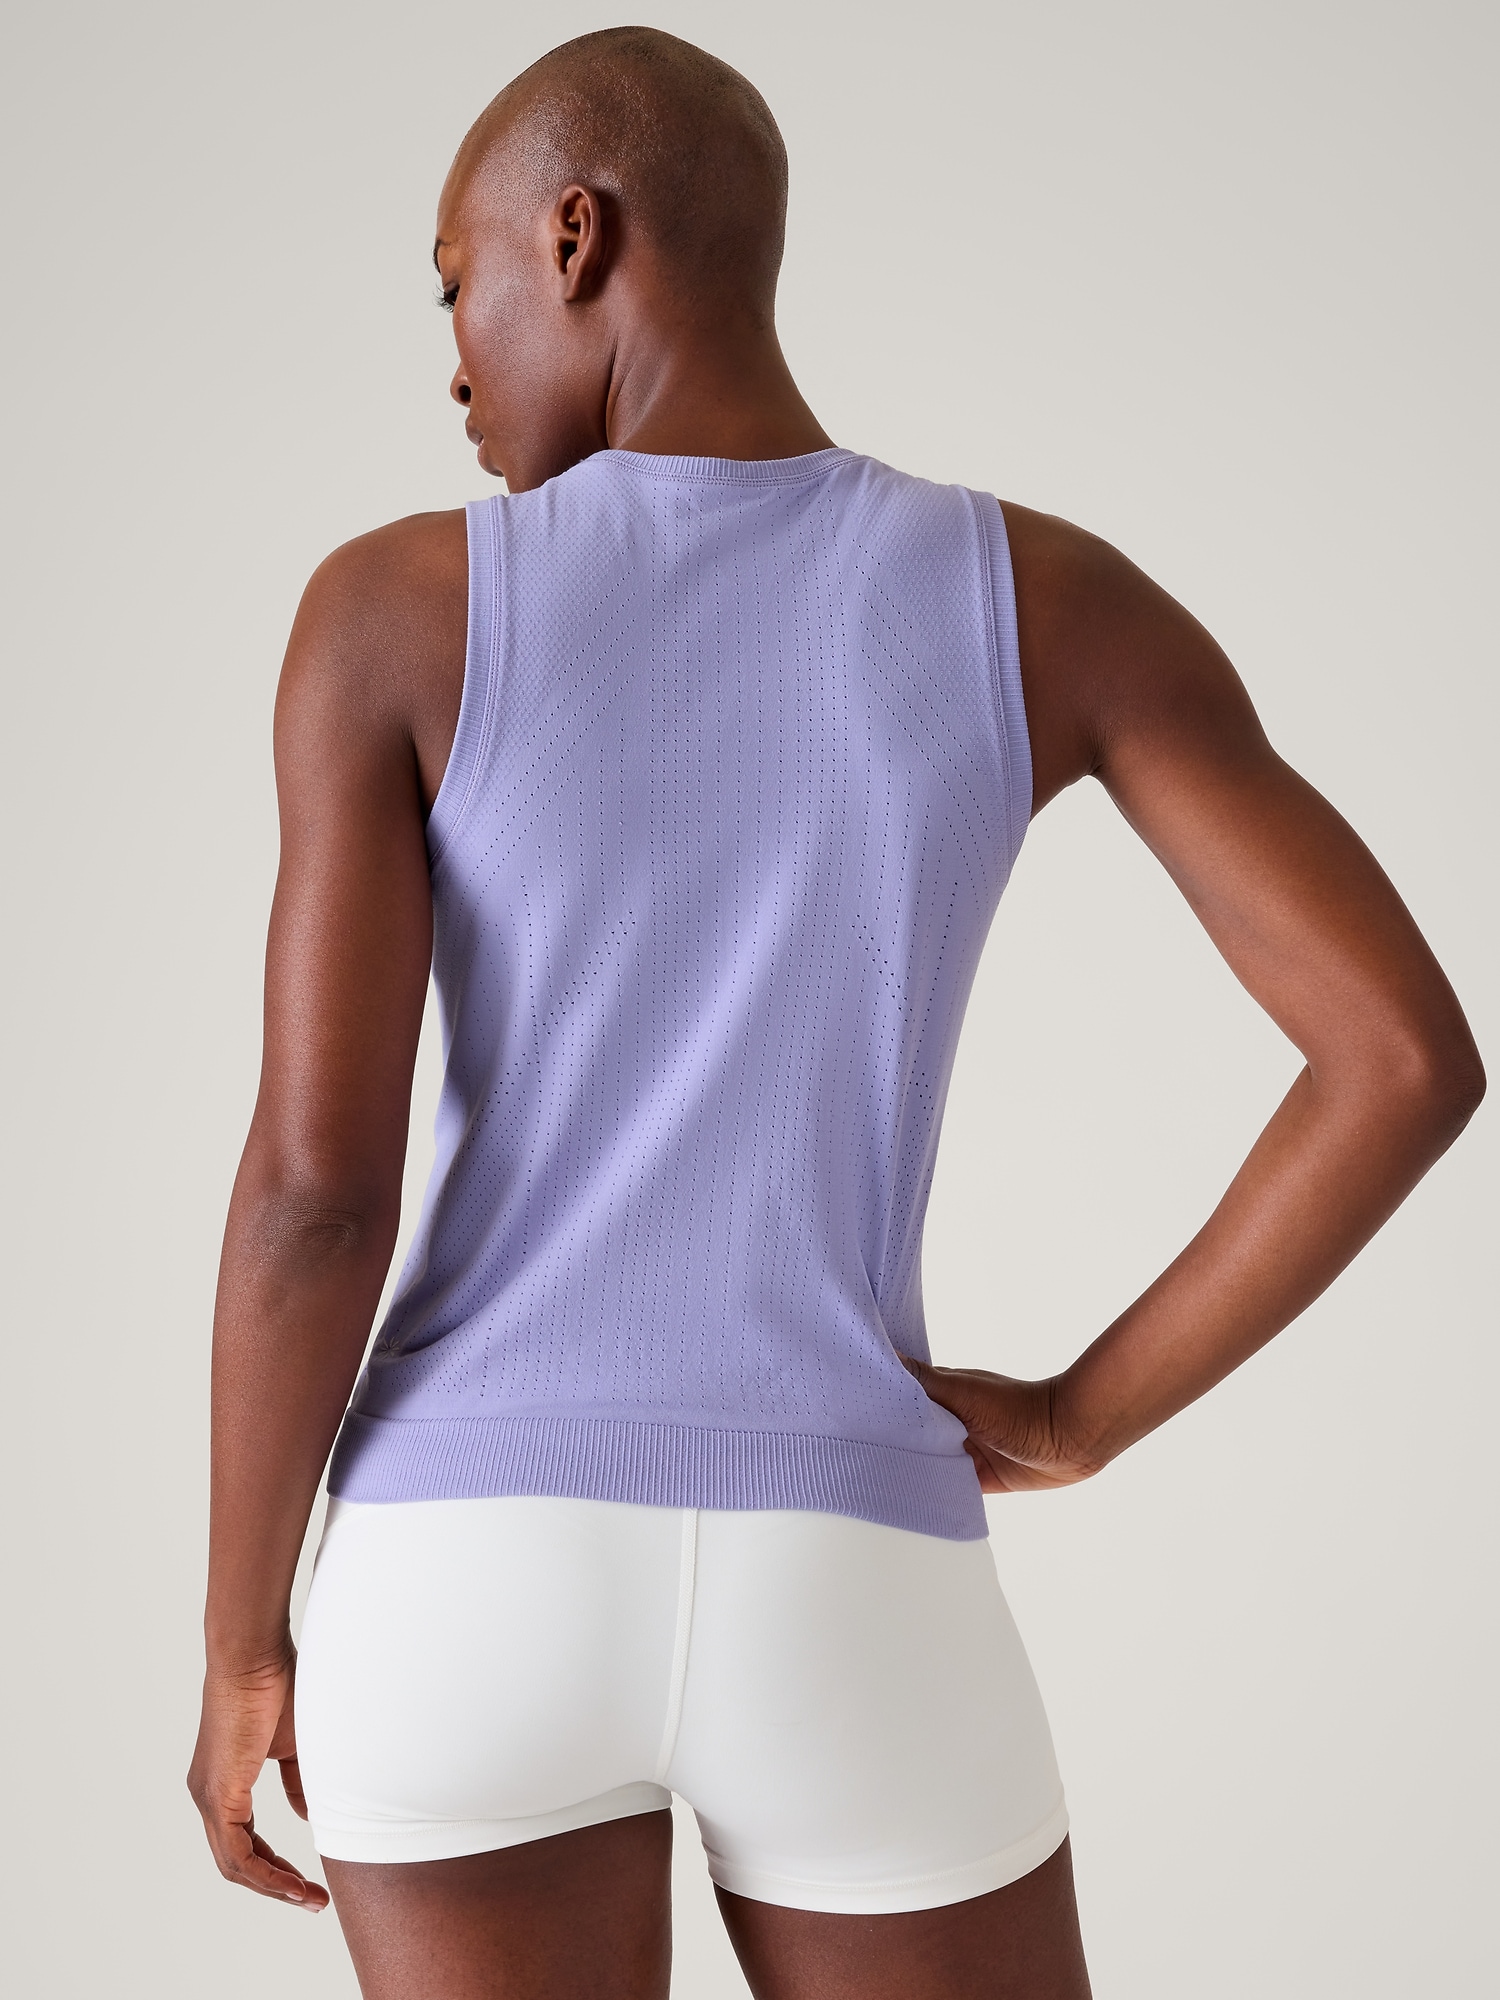 All In Motion Down Athletic Tank Tops for Women